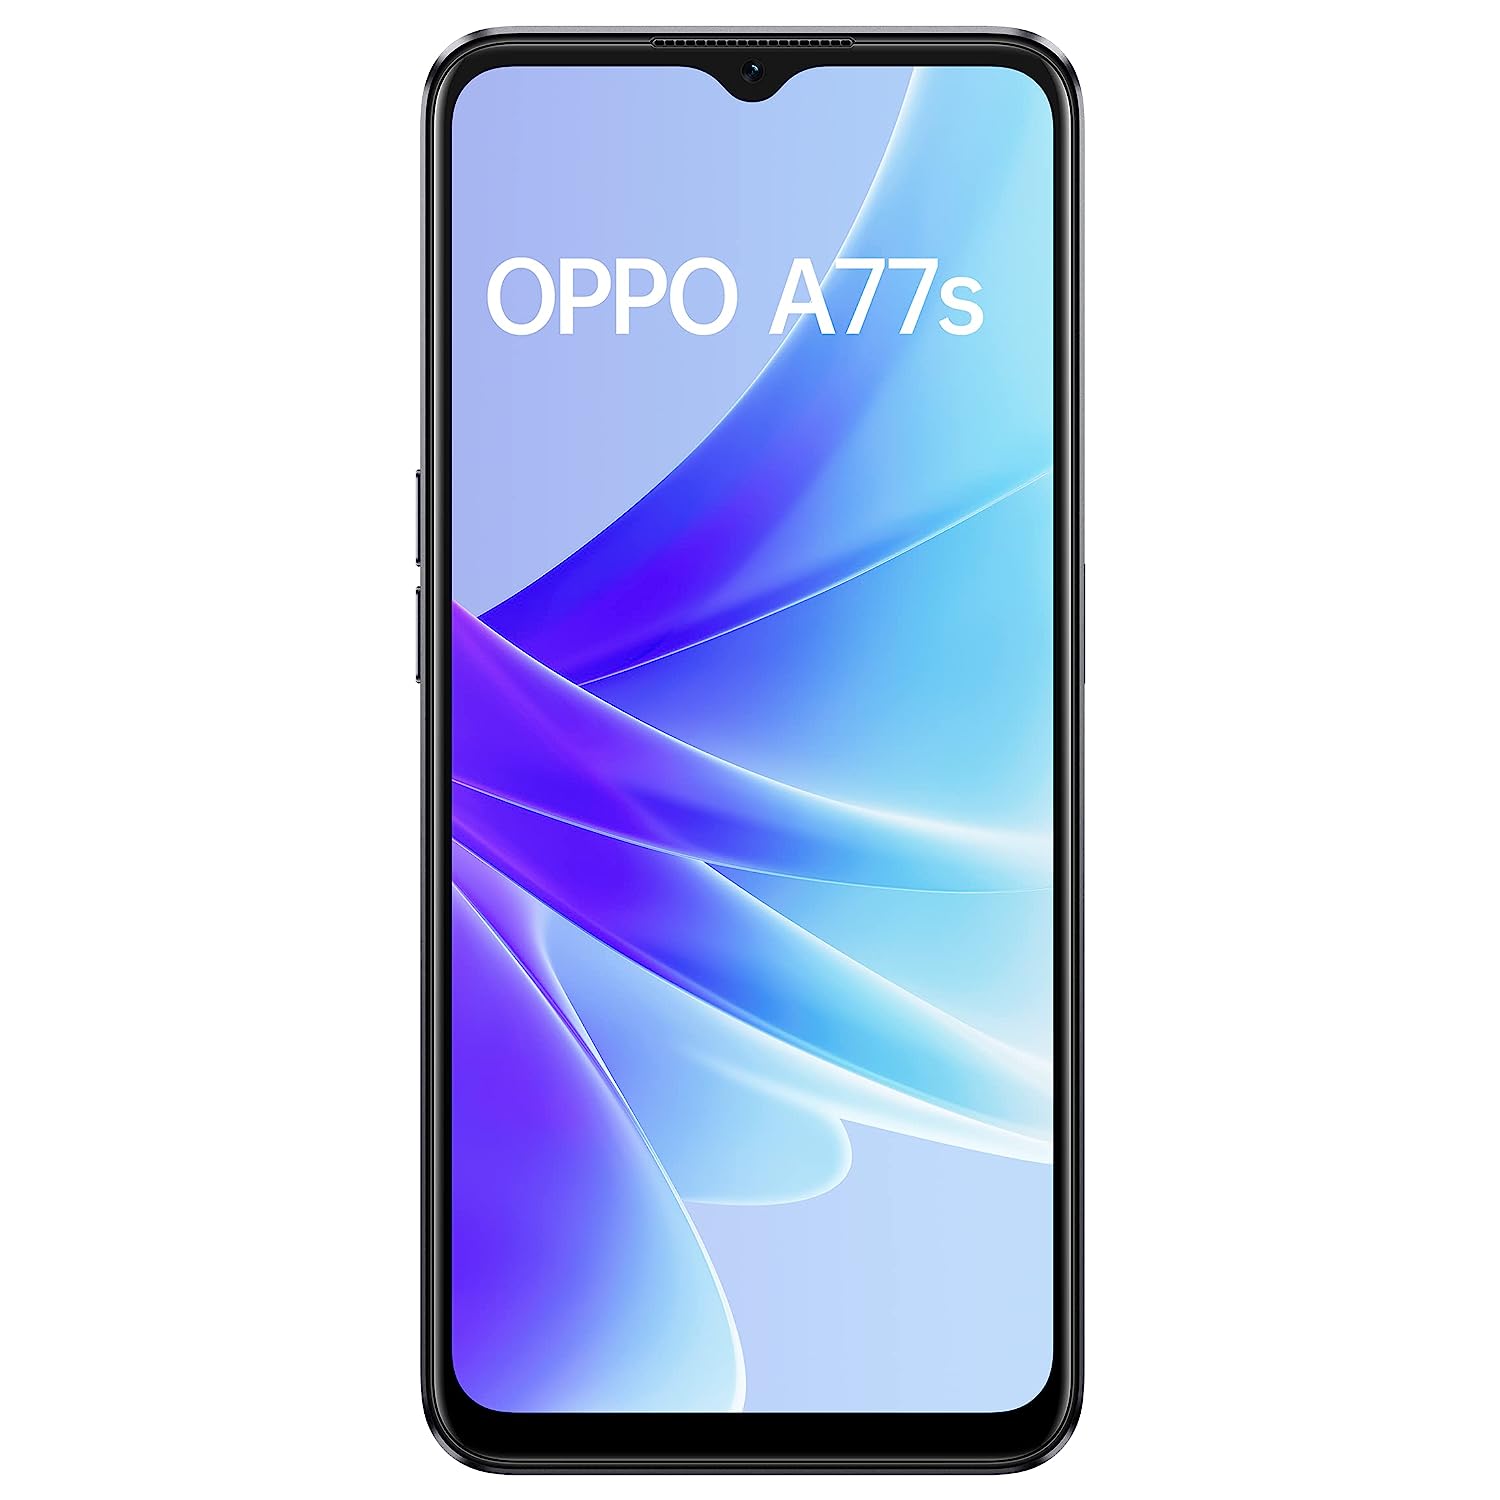 Get discount on OPPO 77s phone from Brother-Mart